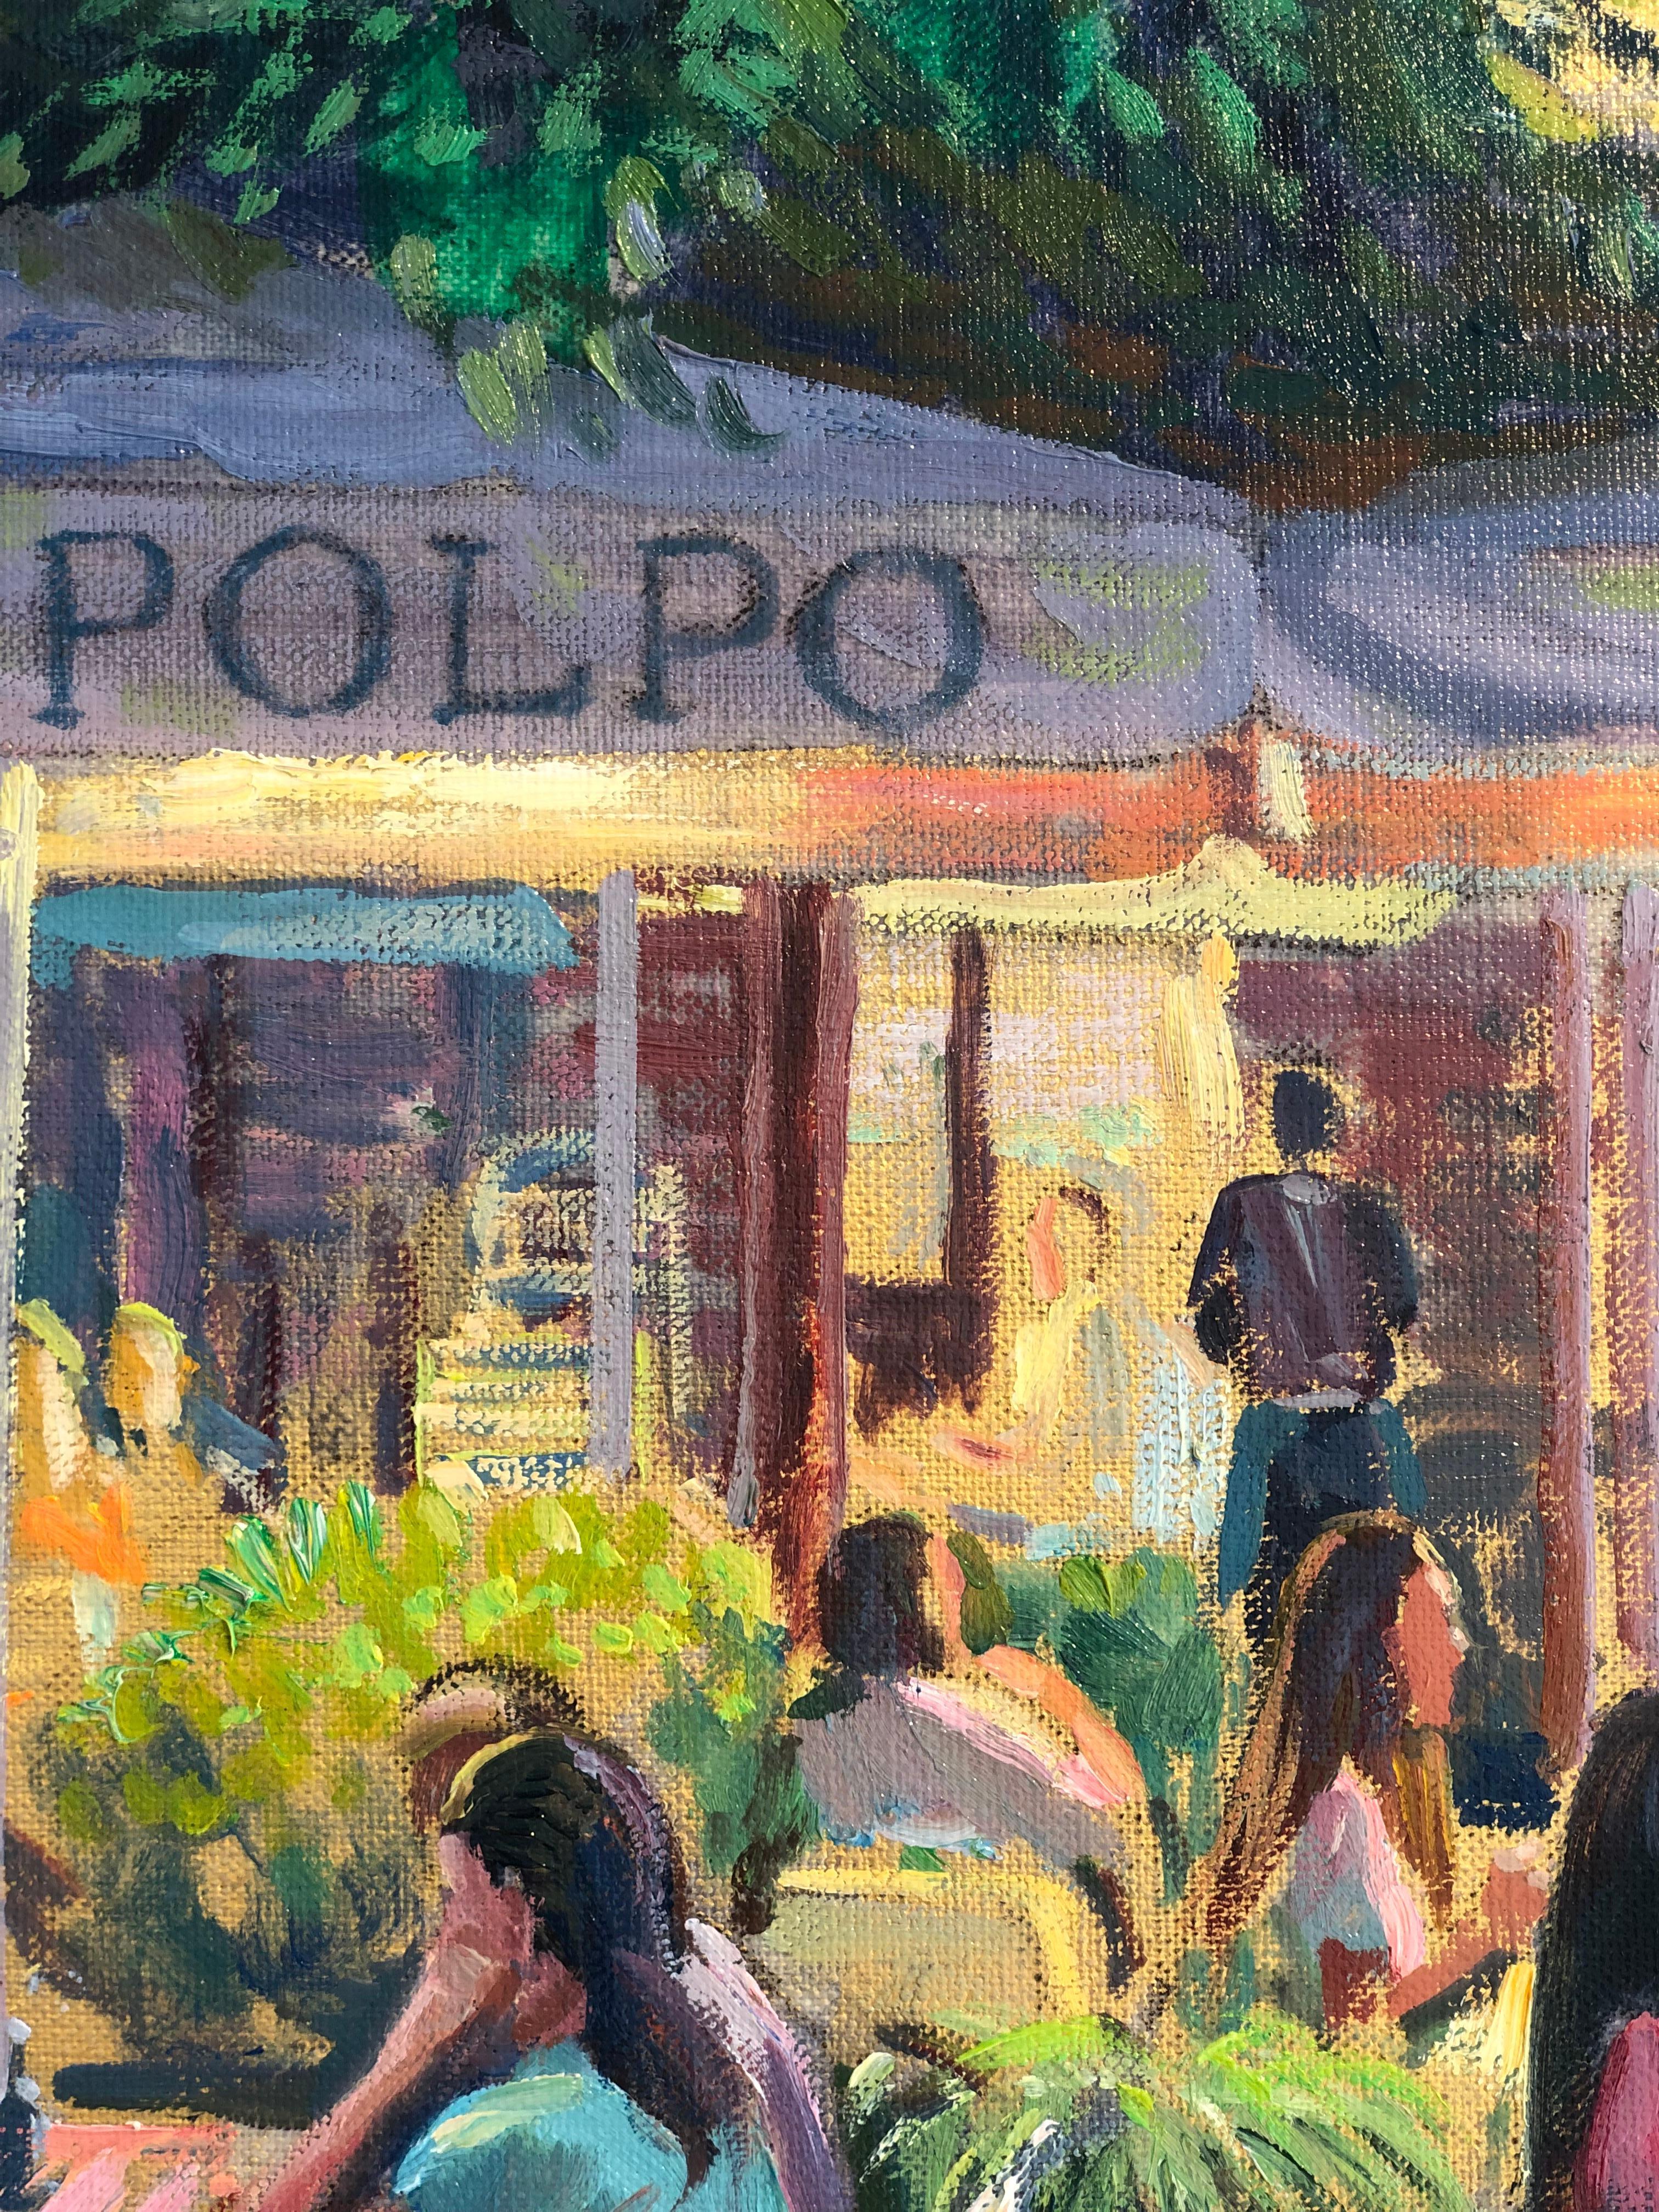 This original oil painting depicts a popular Chelsea restaurant scene and is created by Juan Del Pozo who paints in a reviving modern impressionist style. The artist uses vibrant, pastel hues which enliven a dim night sky that is  magically